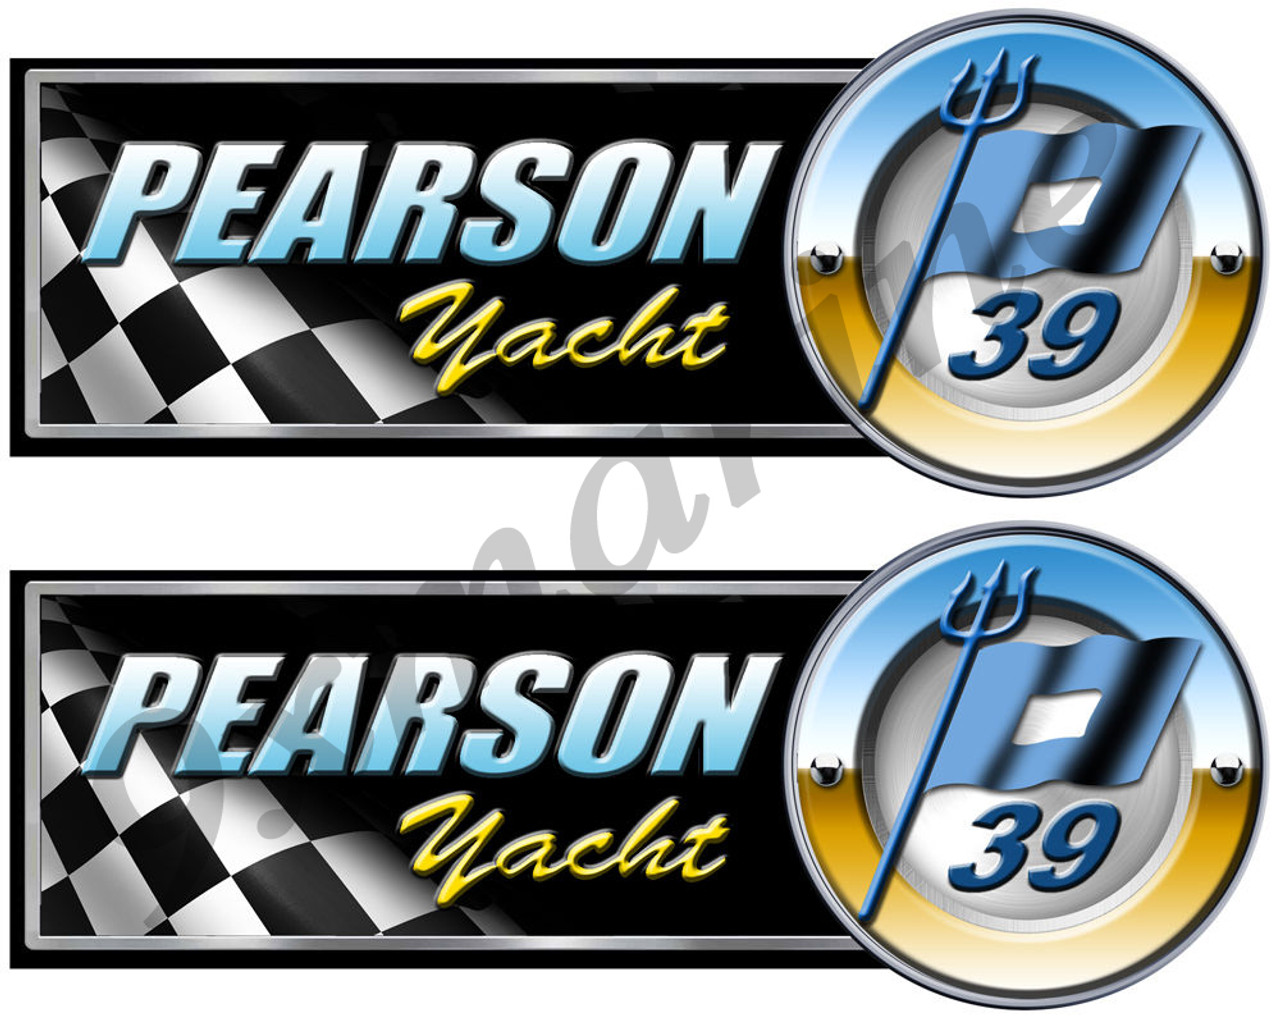 Two Pearson Designer Classic Sticker Set - The model number of your choice